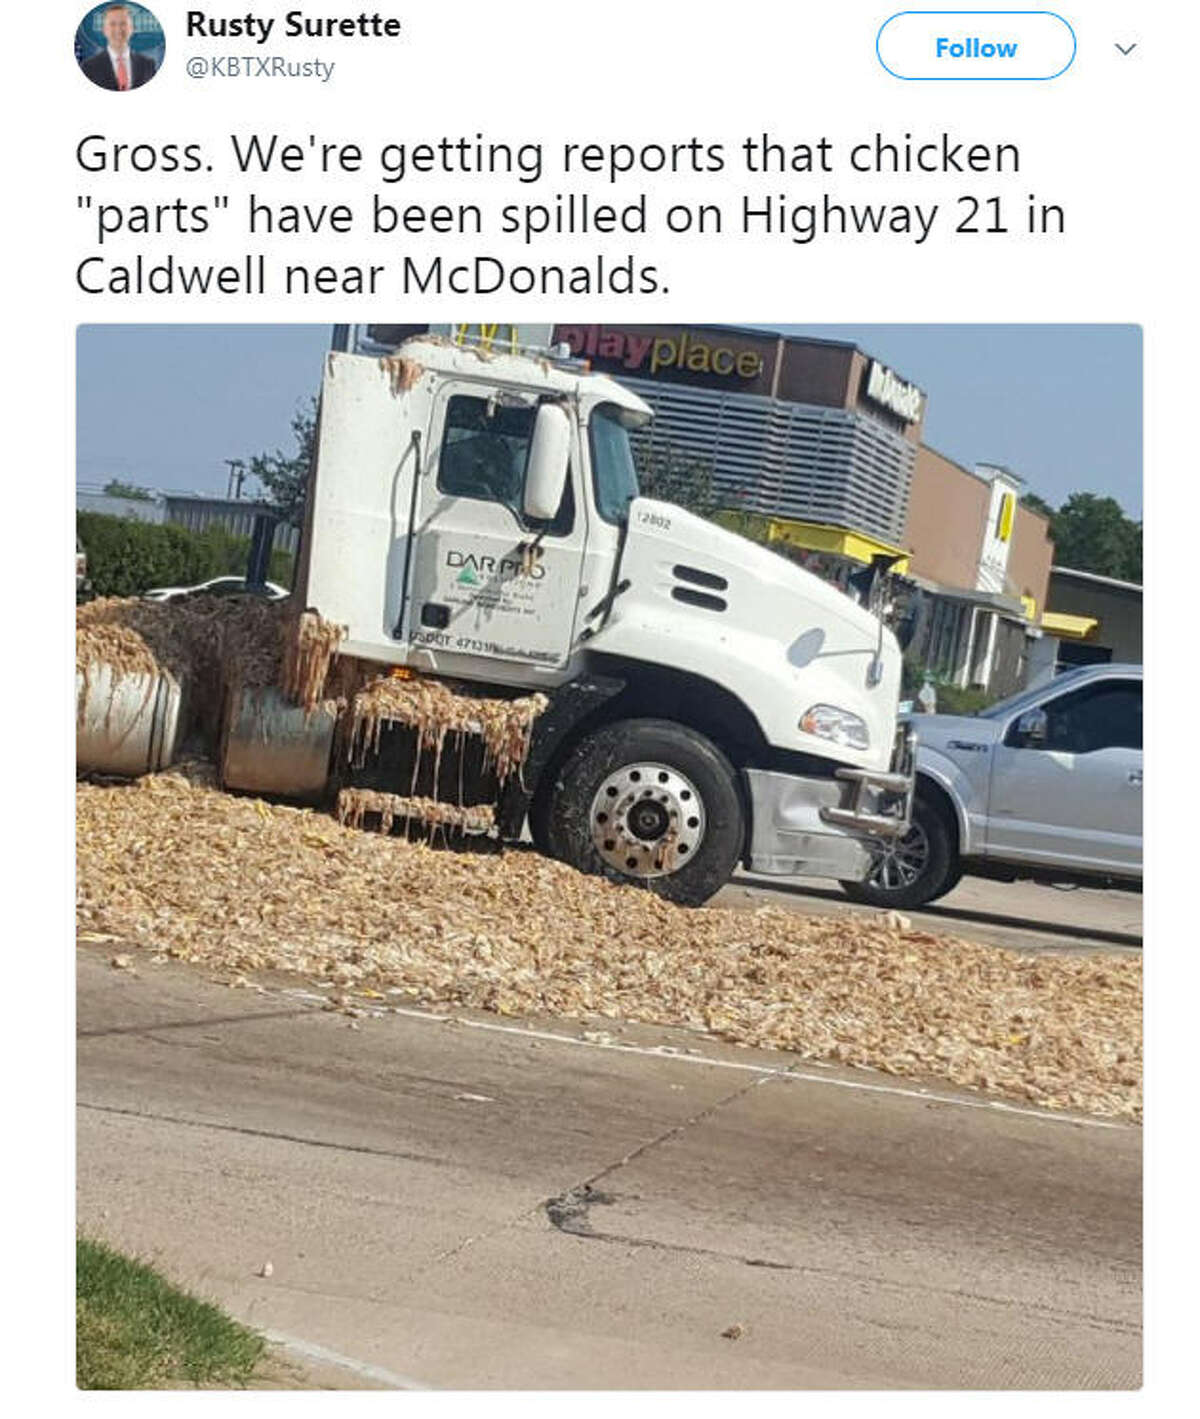 Rusty Surette, a reporter with news station KBTX, tweeted a picture of chicken parts that spilled on Highway 21 in Caldwell, Texas on Sept. 14, 2017. Image source: Twitter See where the best spots in Houston are to get fried chicken.